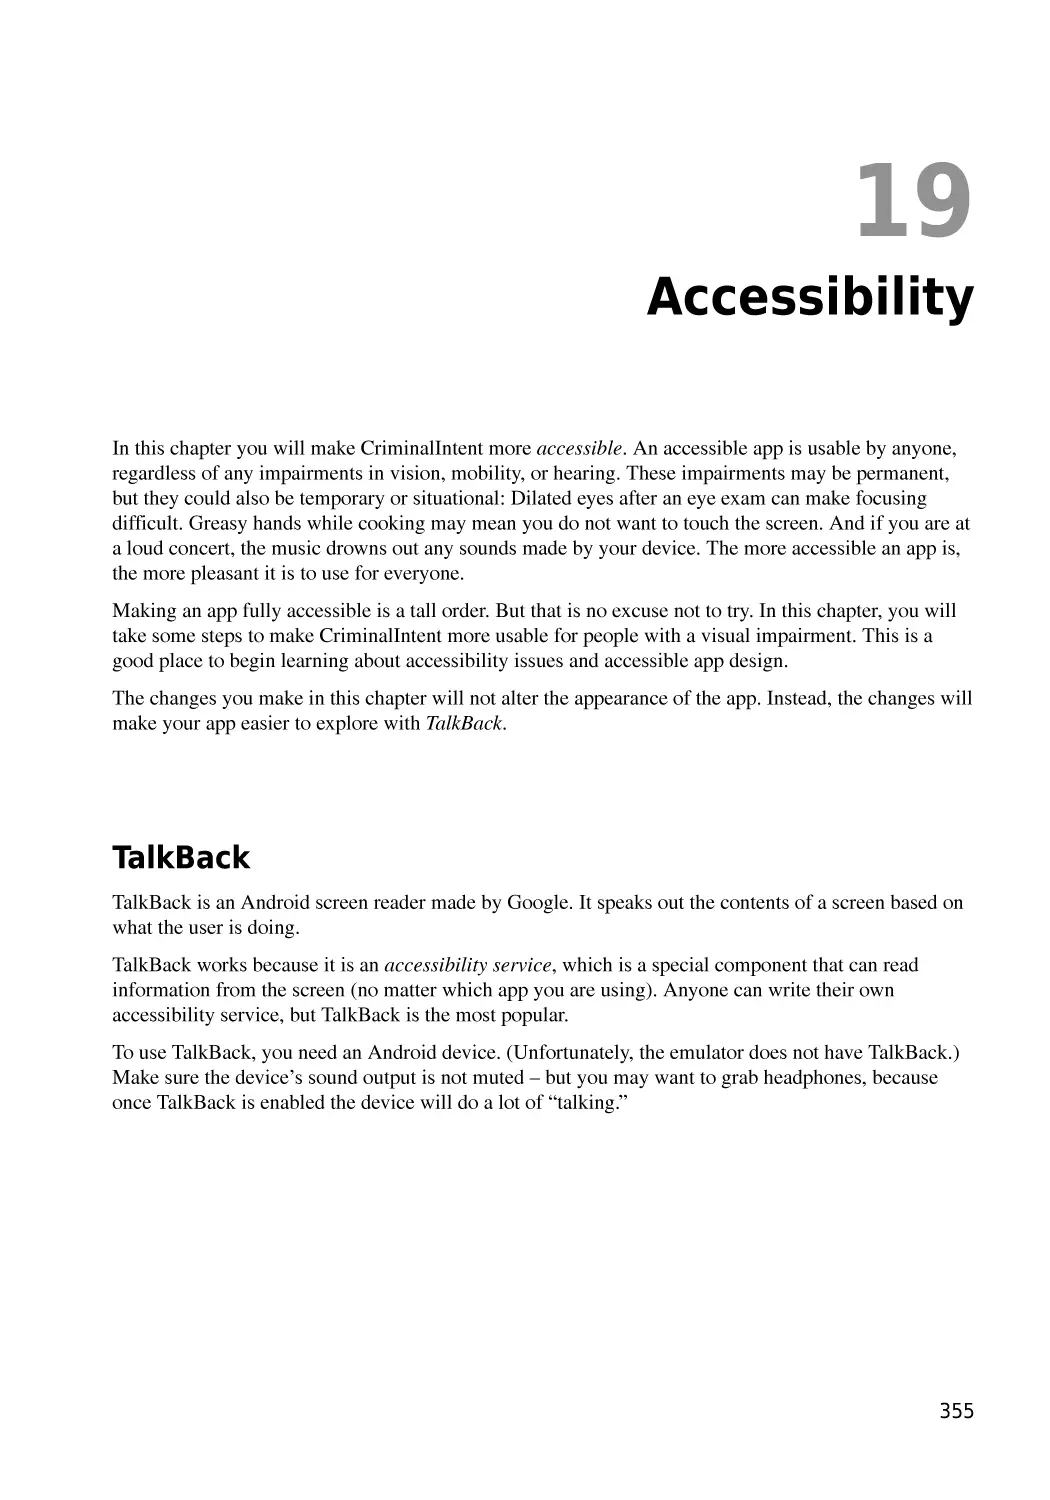 Chapter 19  Accessibility
TalkBack